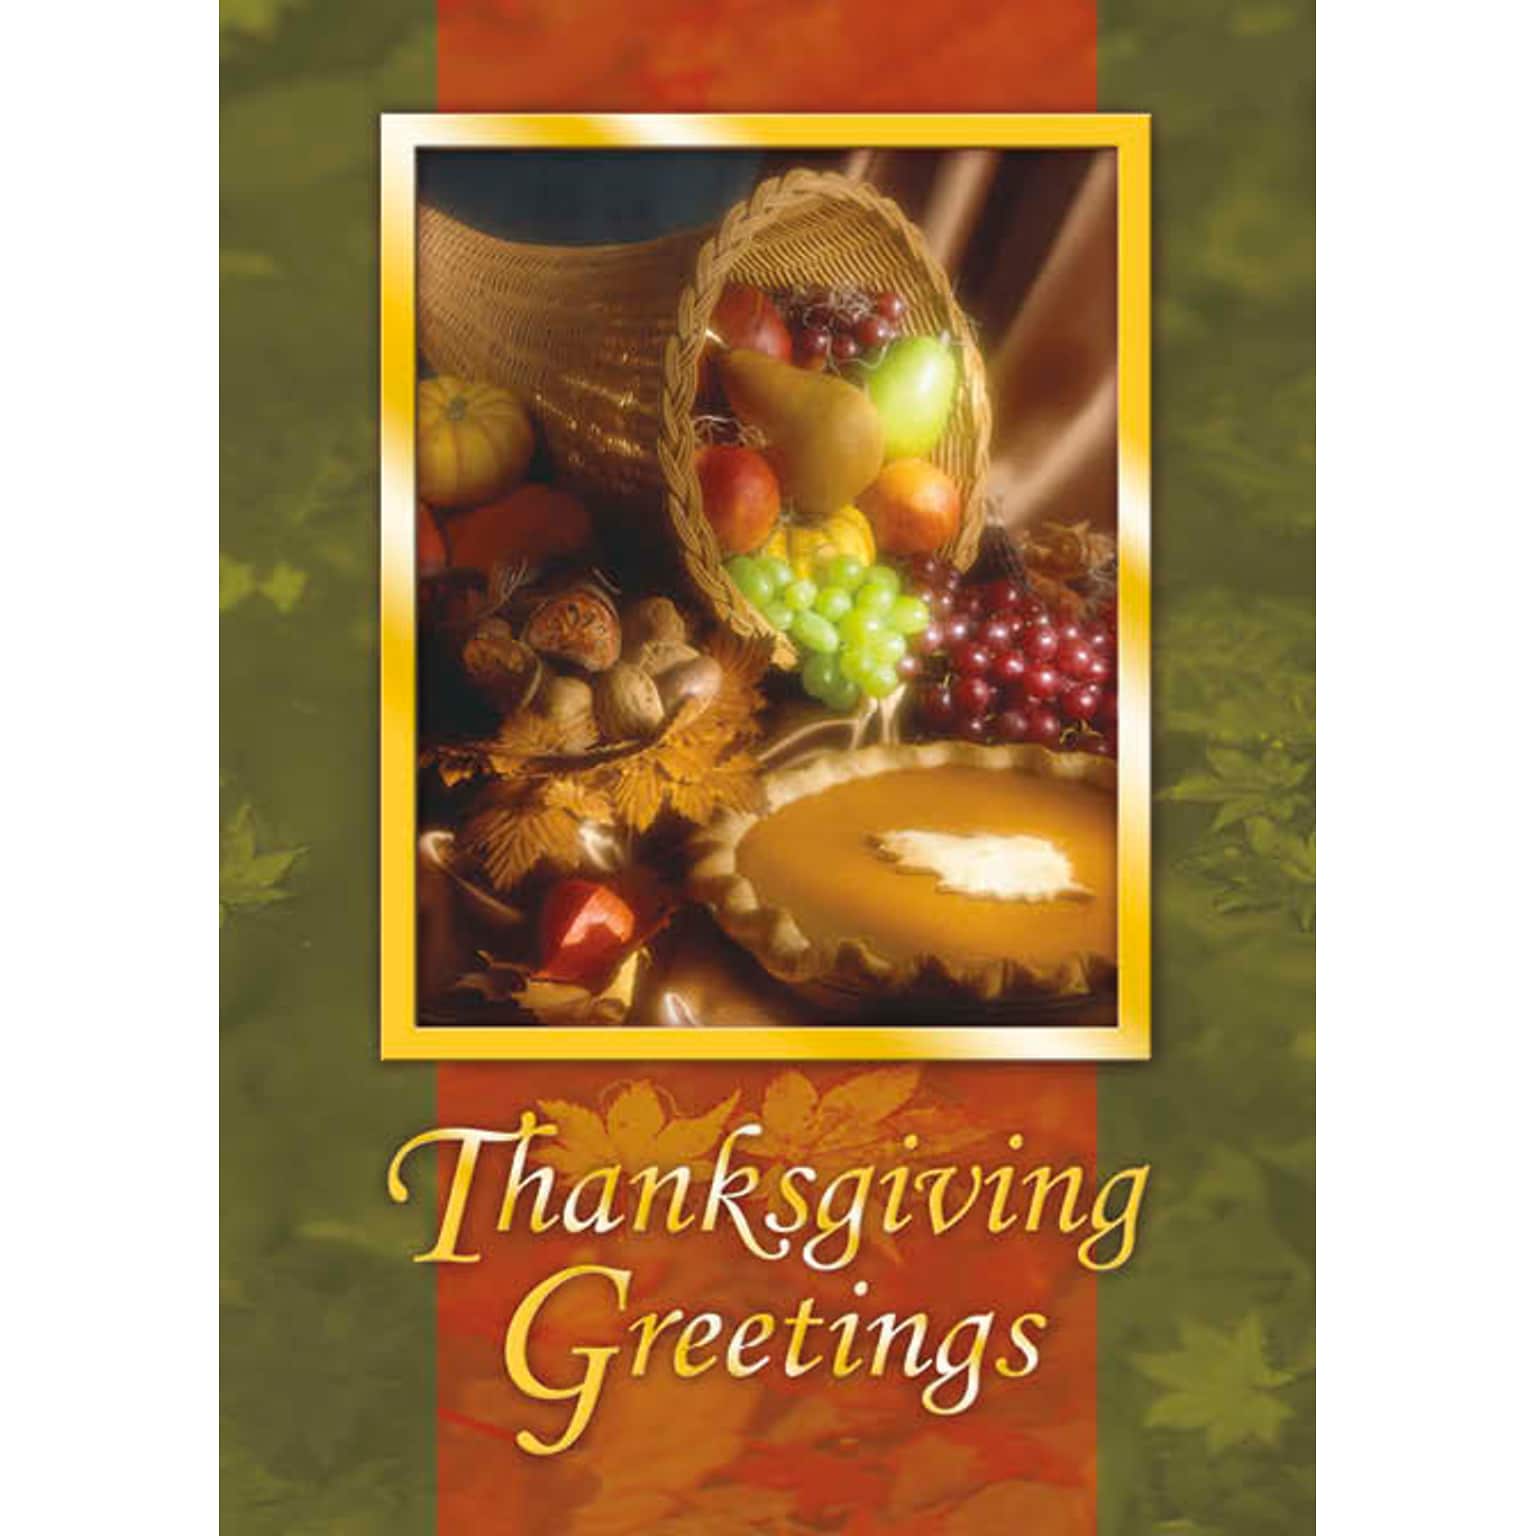 Thanksgiving Greetings Basket Of Fruit Autumn Seasonal Greeting Cards, With A7 Envelopes, 7 x 5, 25 Cards per Set